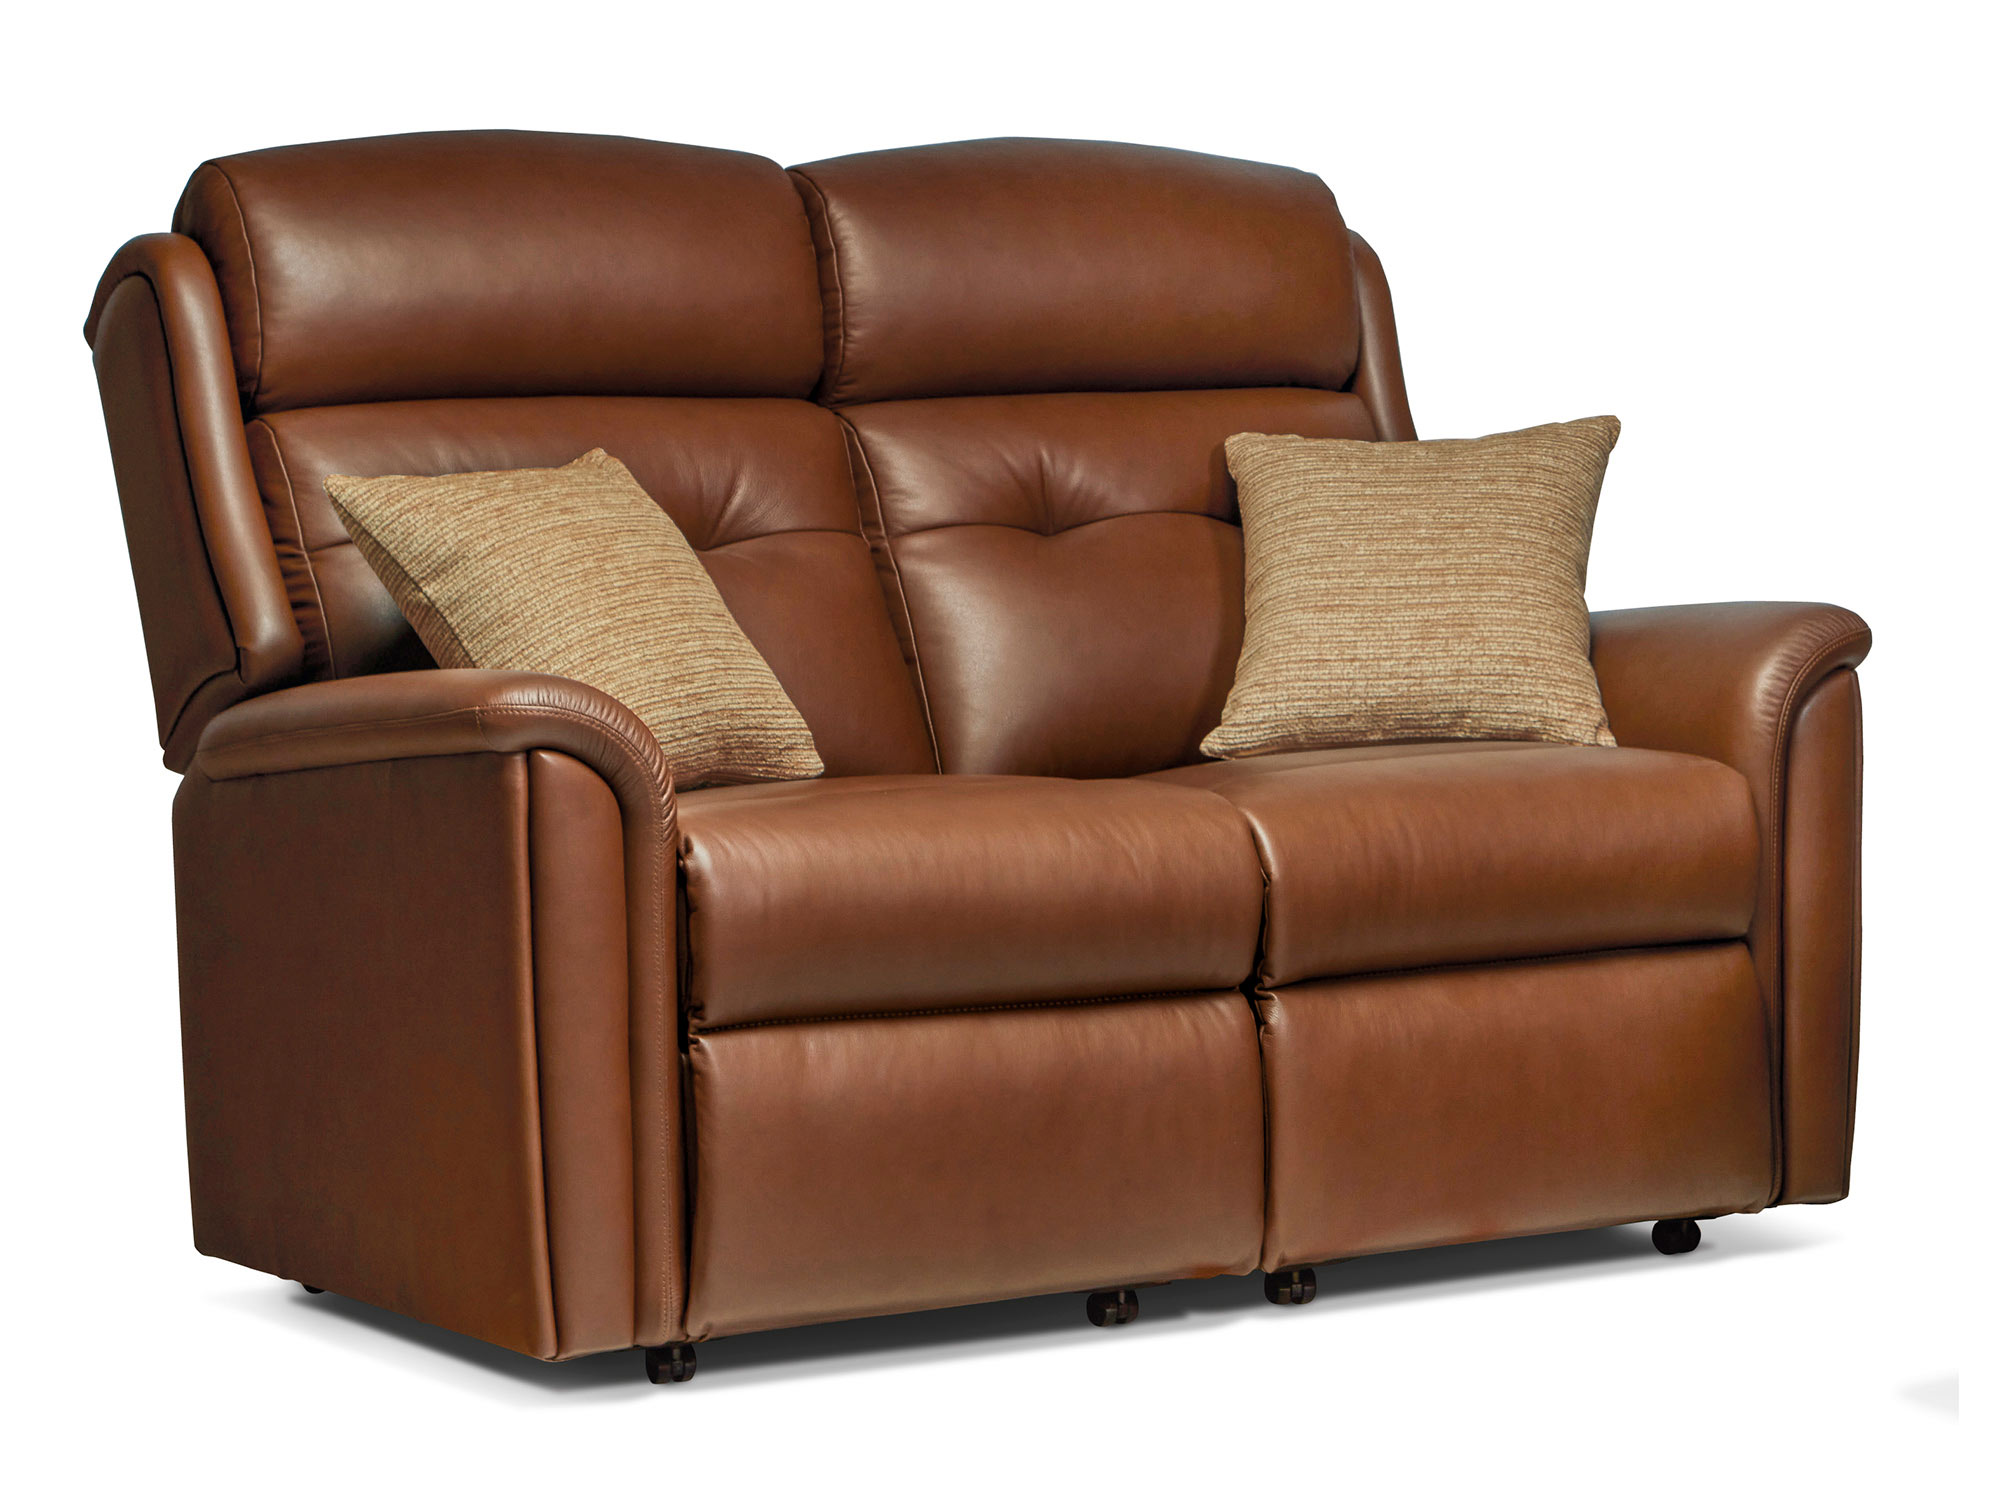 Roma Sofas Chairs And Recliners, Roma Leather Recliner Sofa Reviews